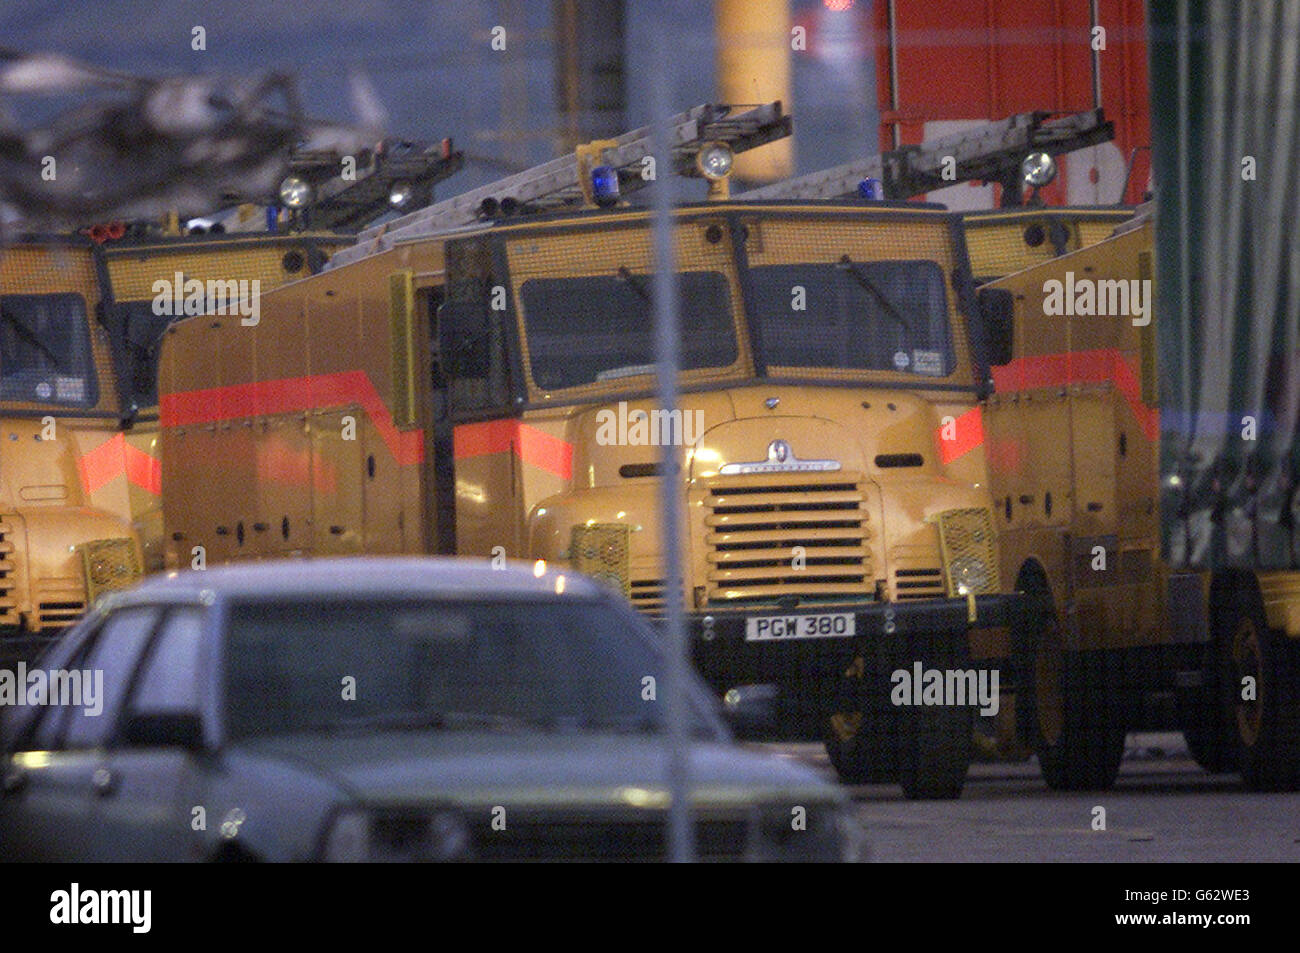 A convoy of British Army fire appliances (known as Green Goddess) arriving at Belfast dock- one of which fell victim to mechanical breakdown - for security reasons the fire appliances have been painted yellow, *...to distinguish them as a fire rescue appliance rather than a army vechicle, incase of a terrorist attack, the army fire appliances will replace the regular fire service vehicles, if a an expected nationwide strike takes place in two weeks. Stock Photo